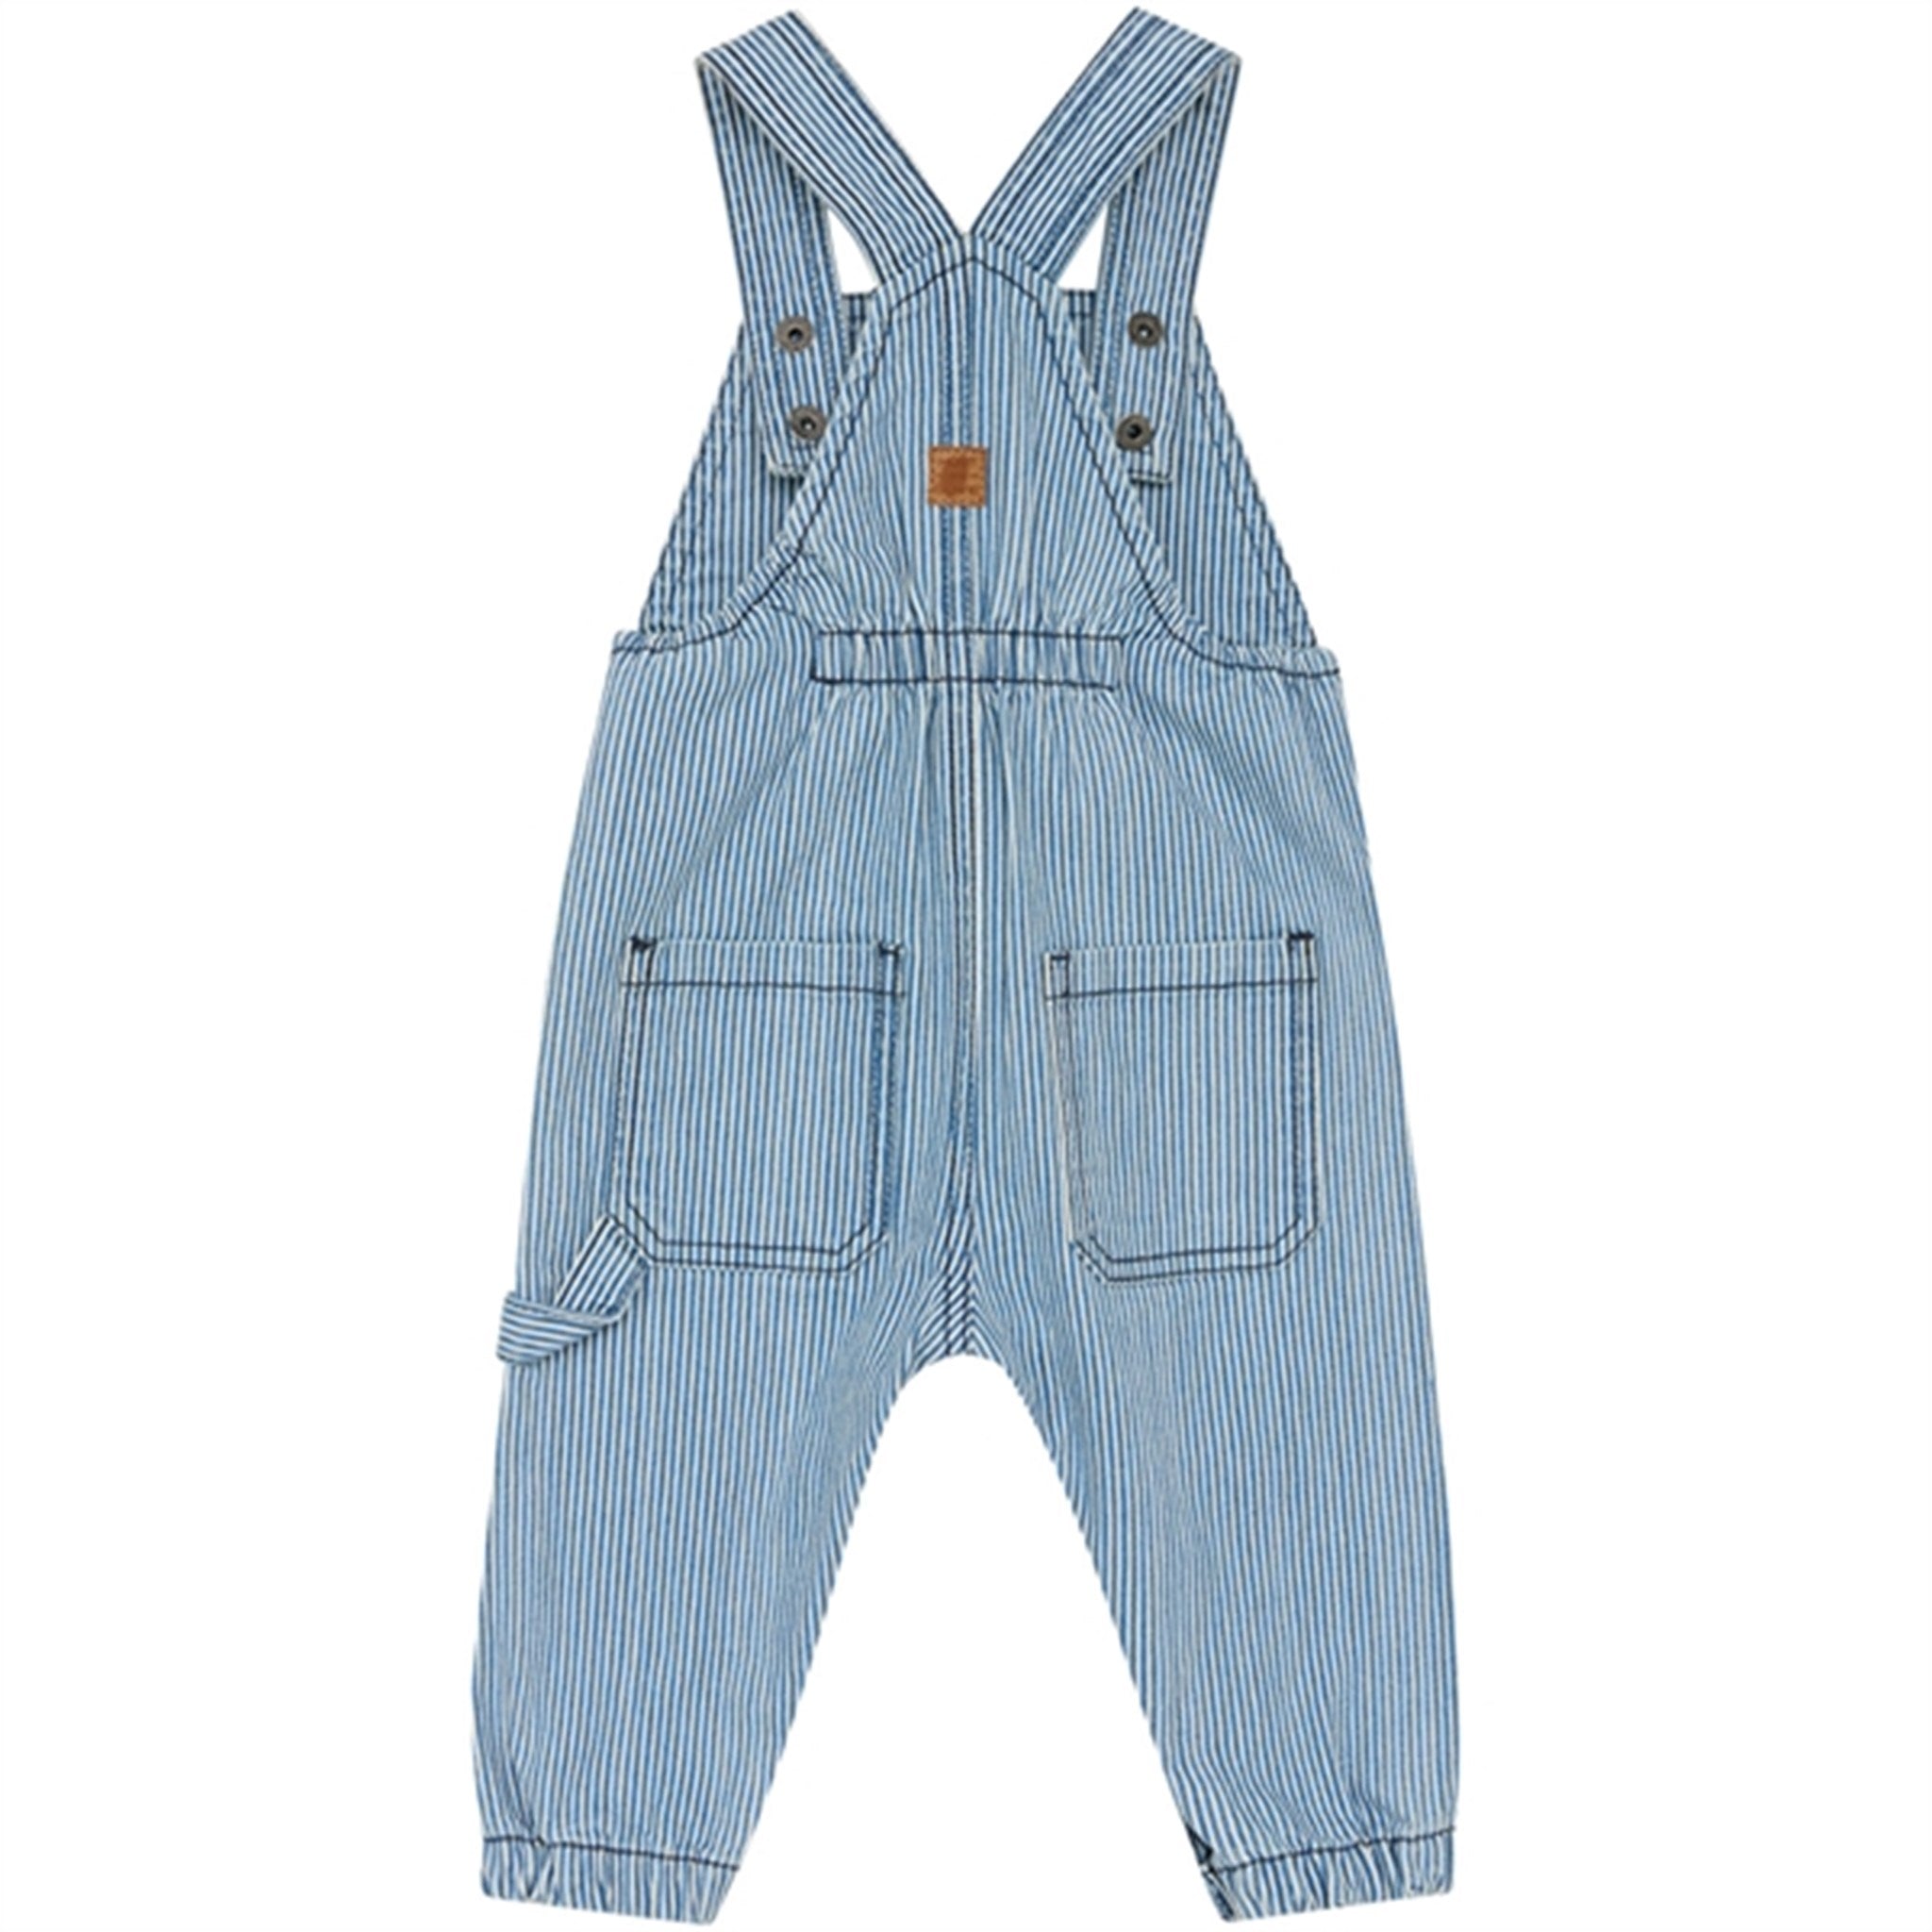 Hust & Claire Bebis Stripes Mads Overalls 2